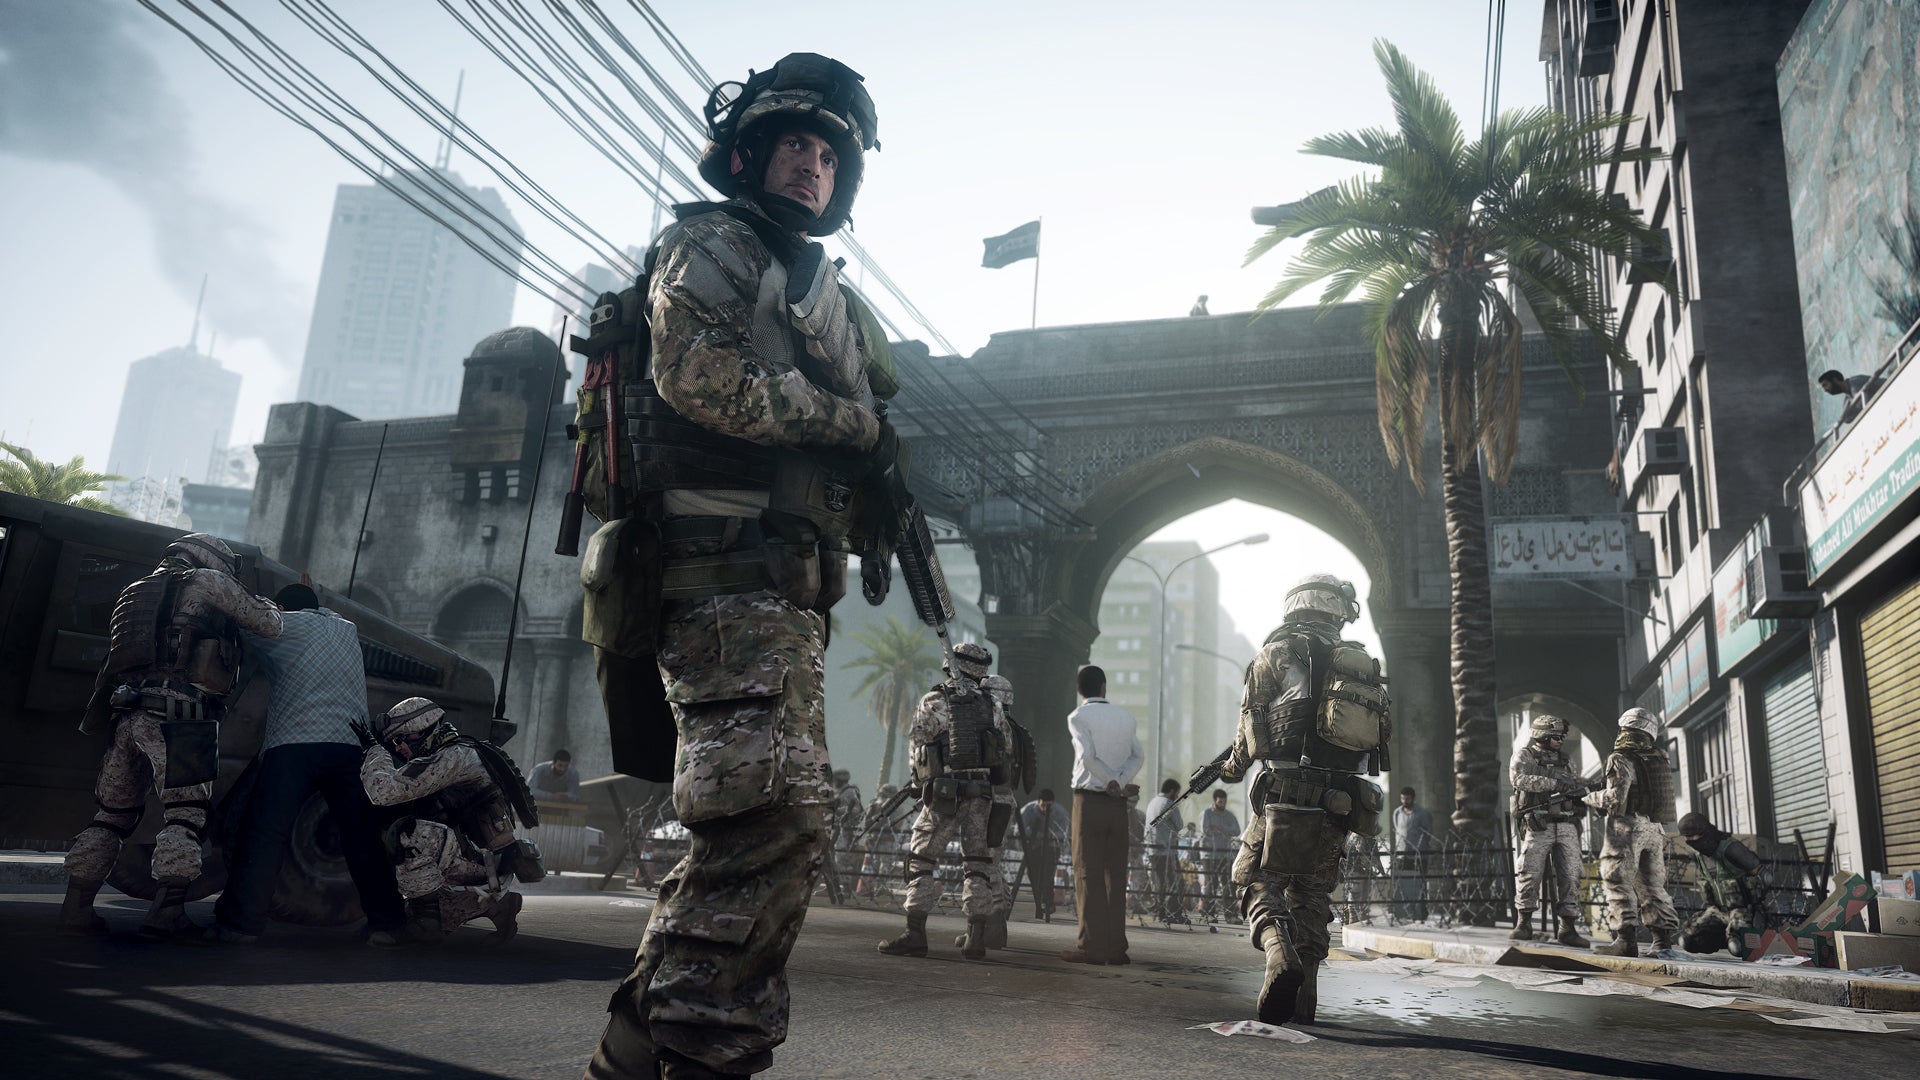 Image for EA admits it "incorrectly" banned some Battlefield 3 players